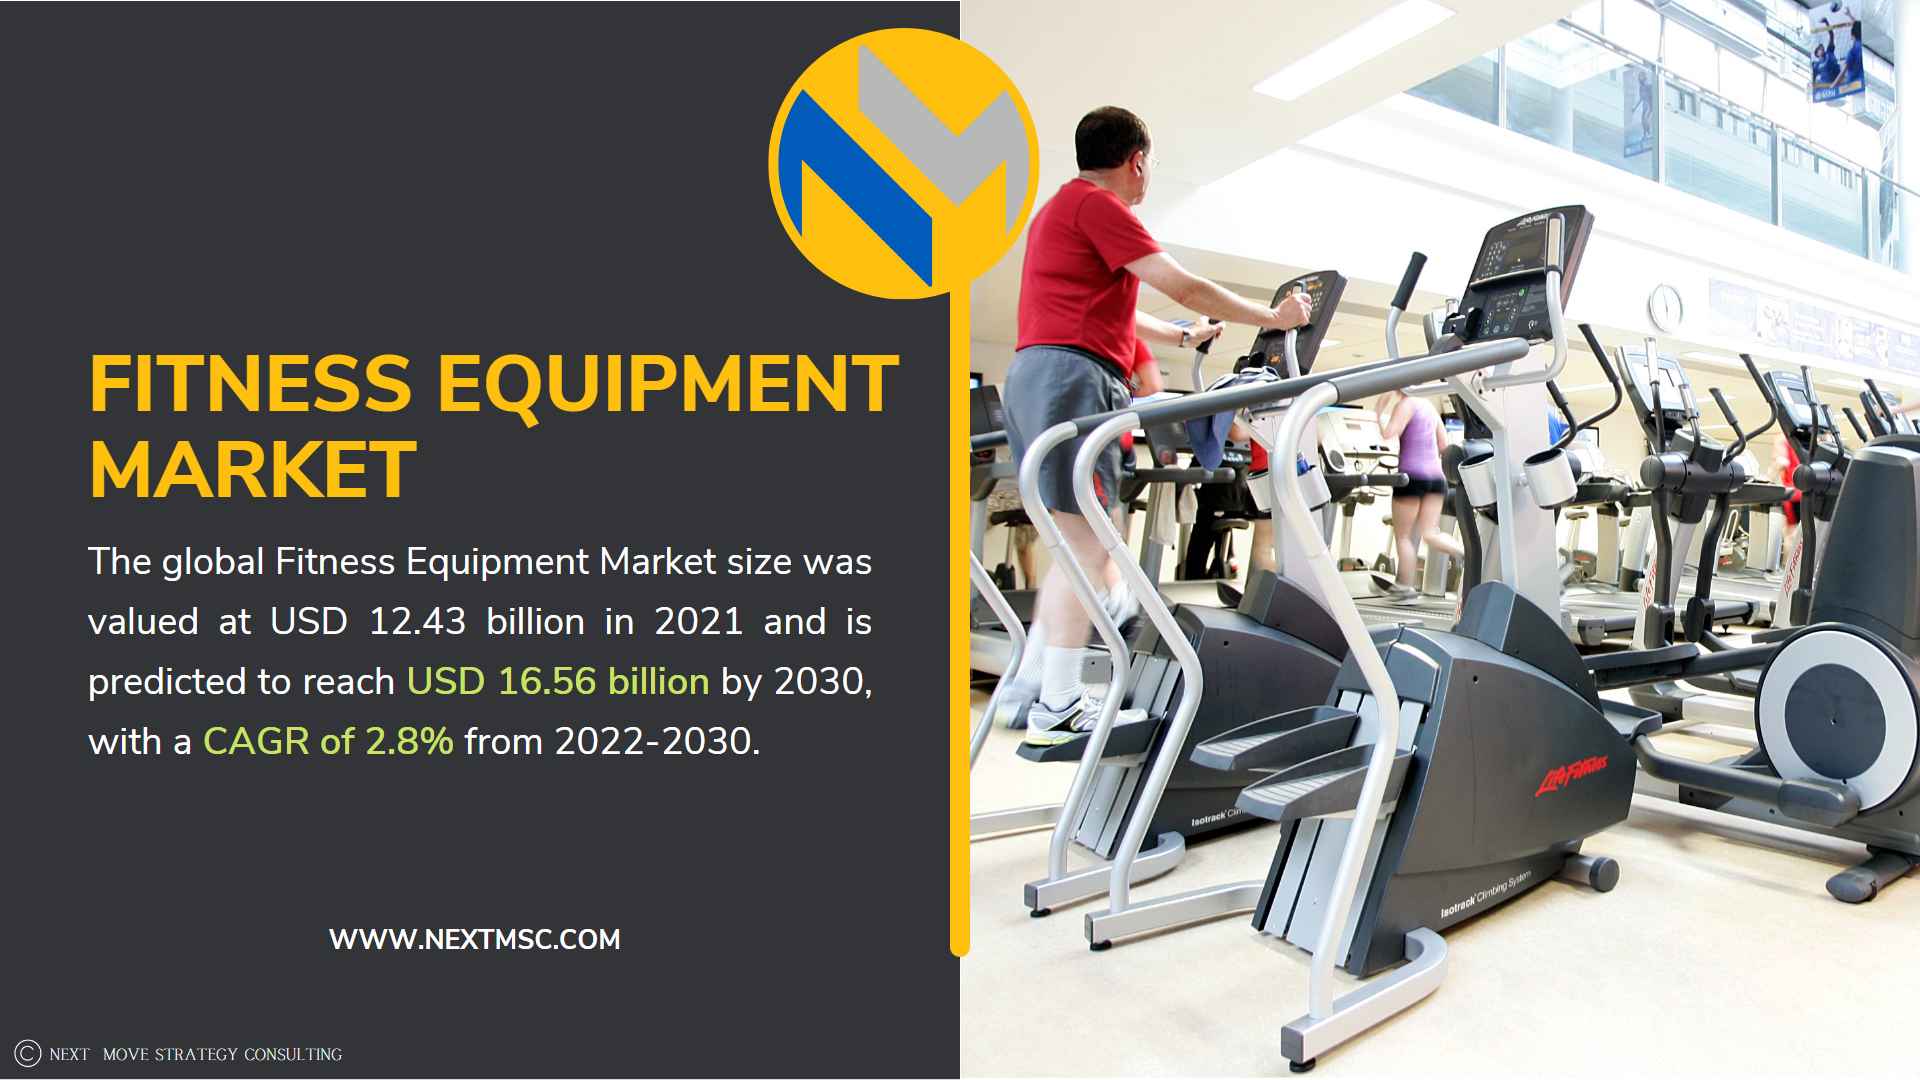 Global Fitness Equipment Market to generate USD 16.56